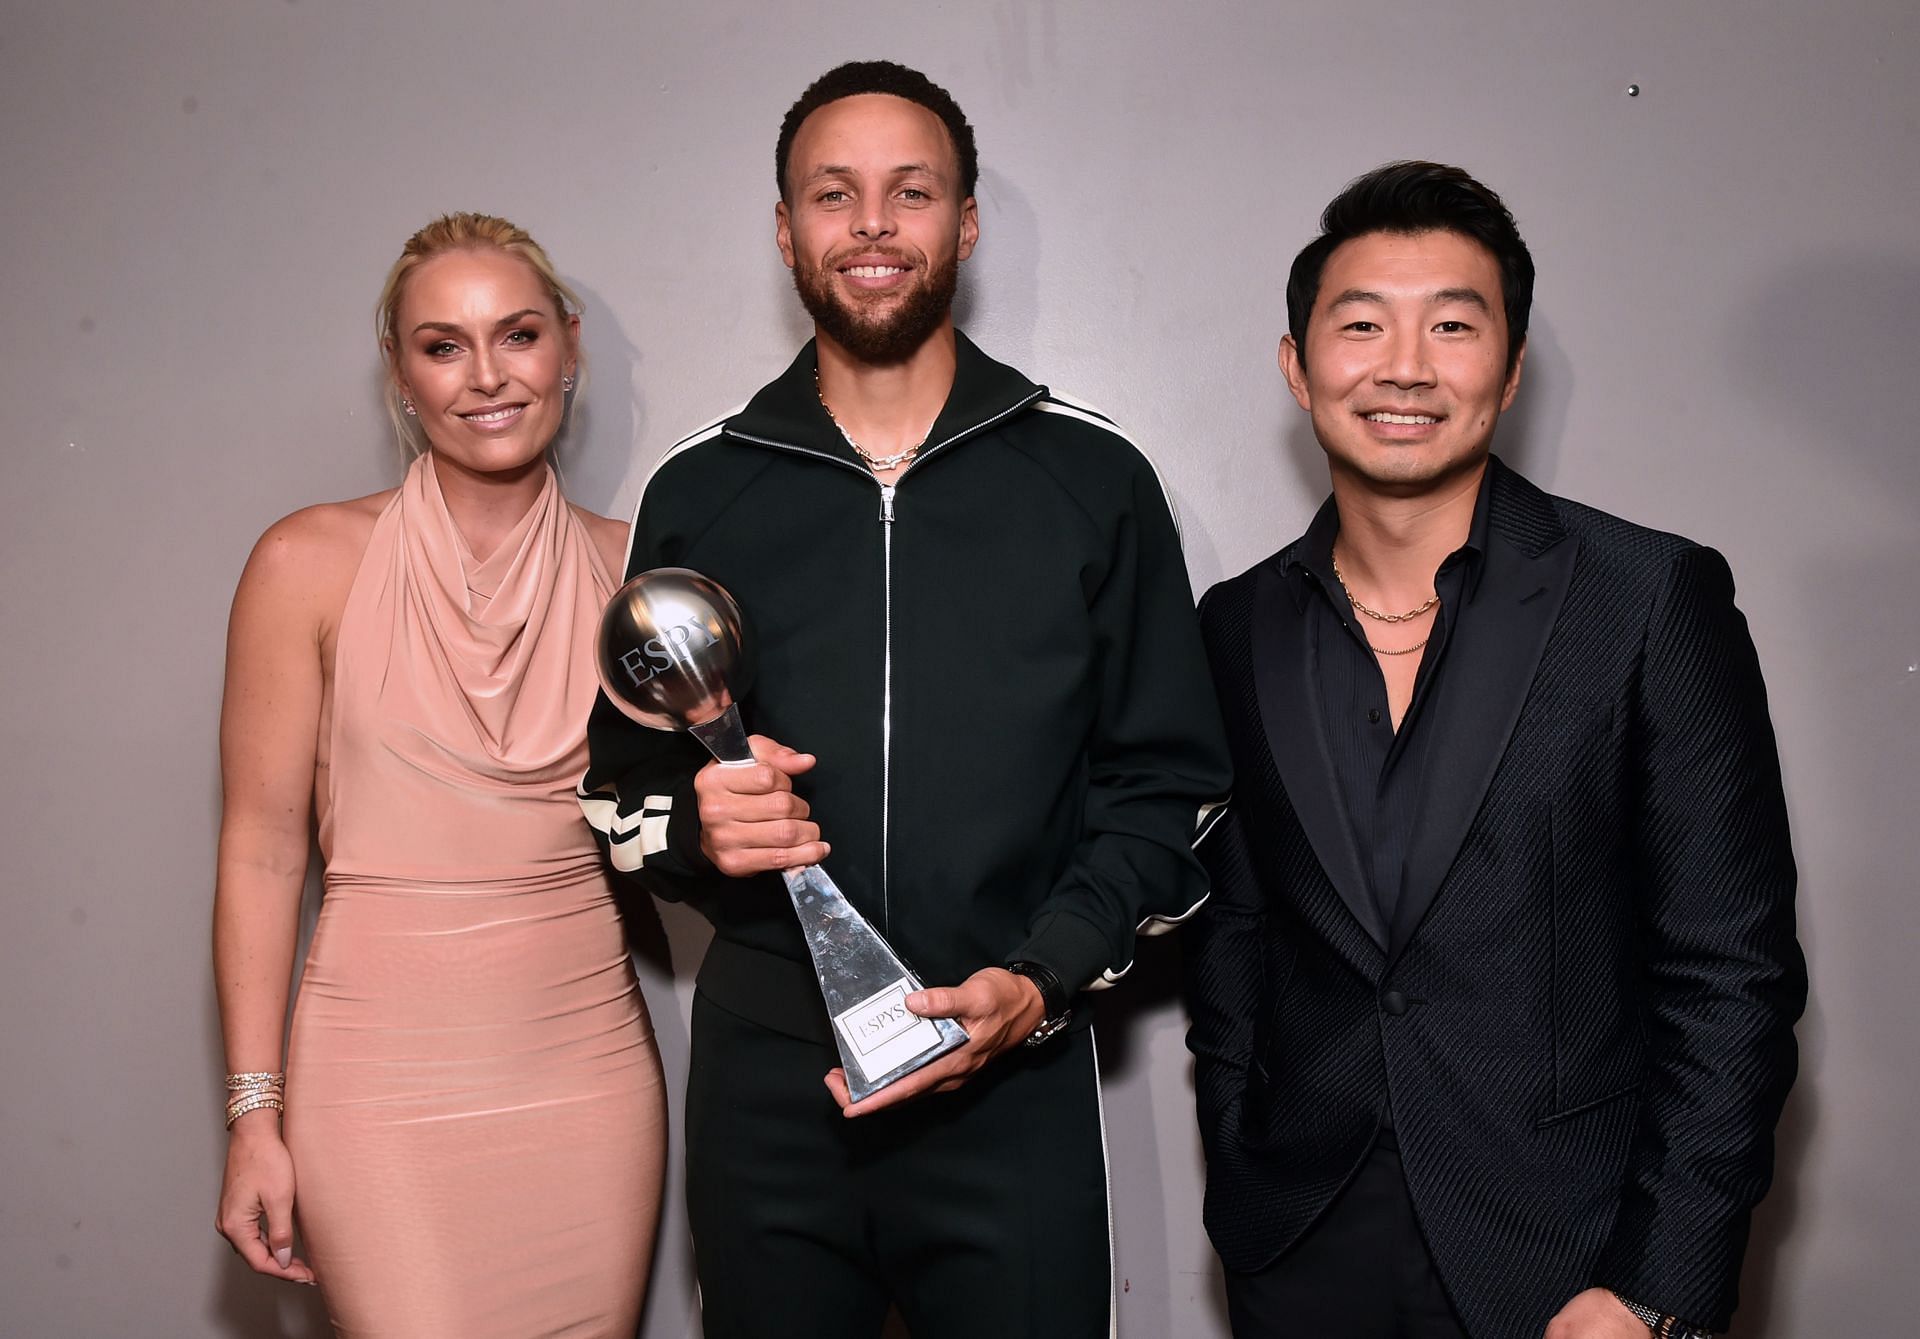 Curry hosted the ESPYs while also winning the award for the Best NBA Player